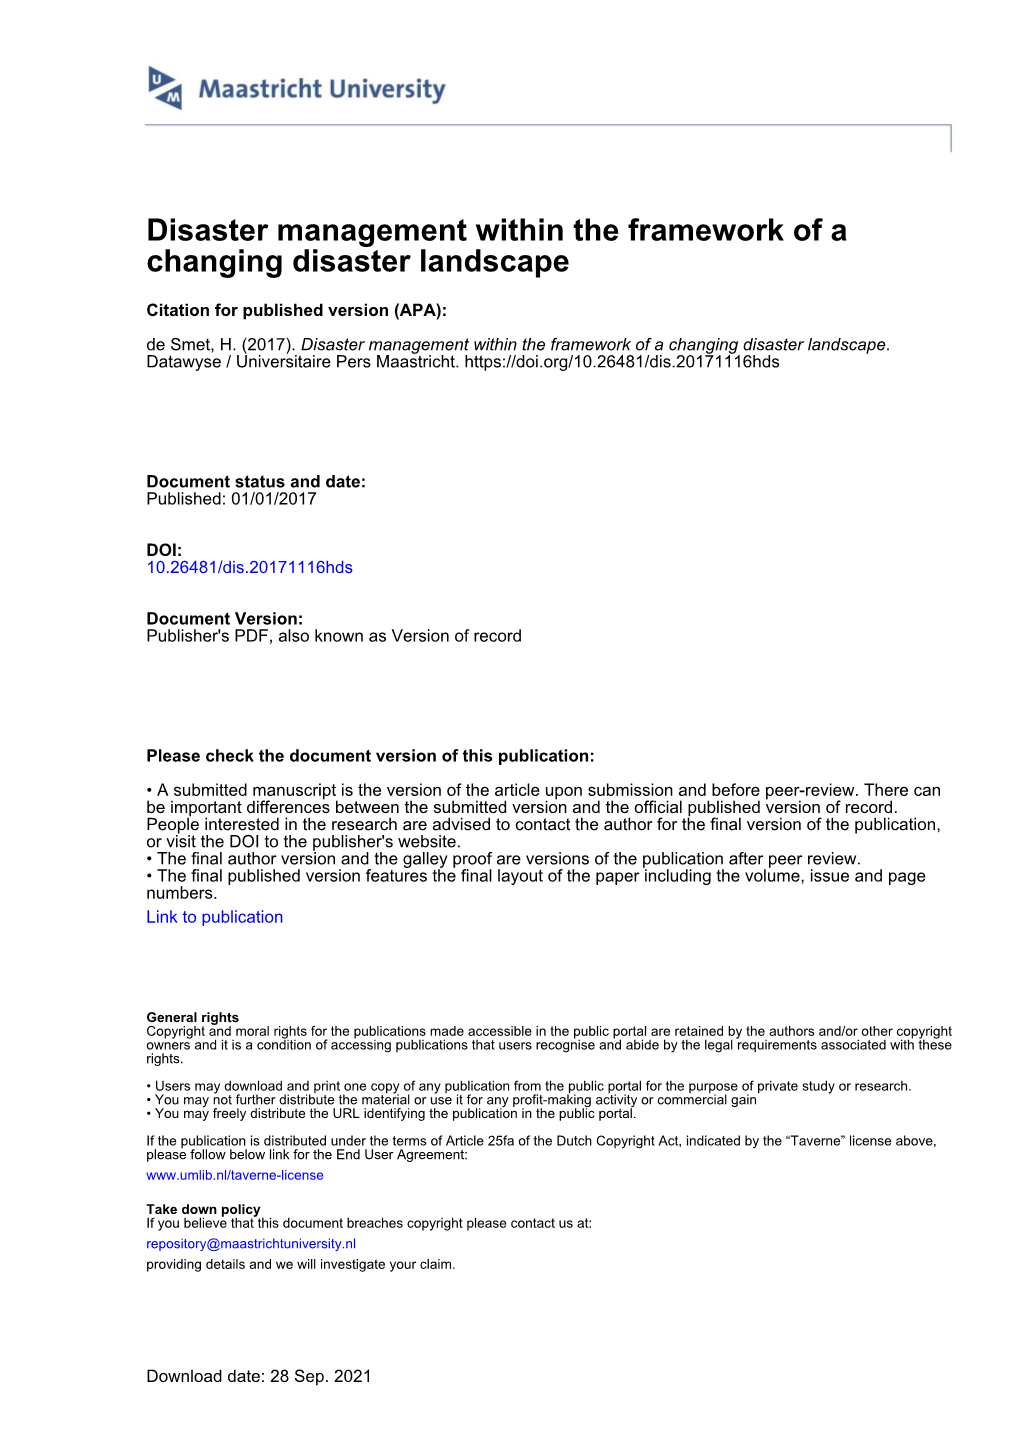 Disaster Management Within the Framework of a Changing Disaster Landscape